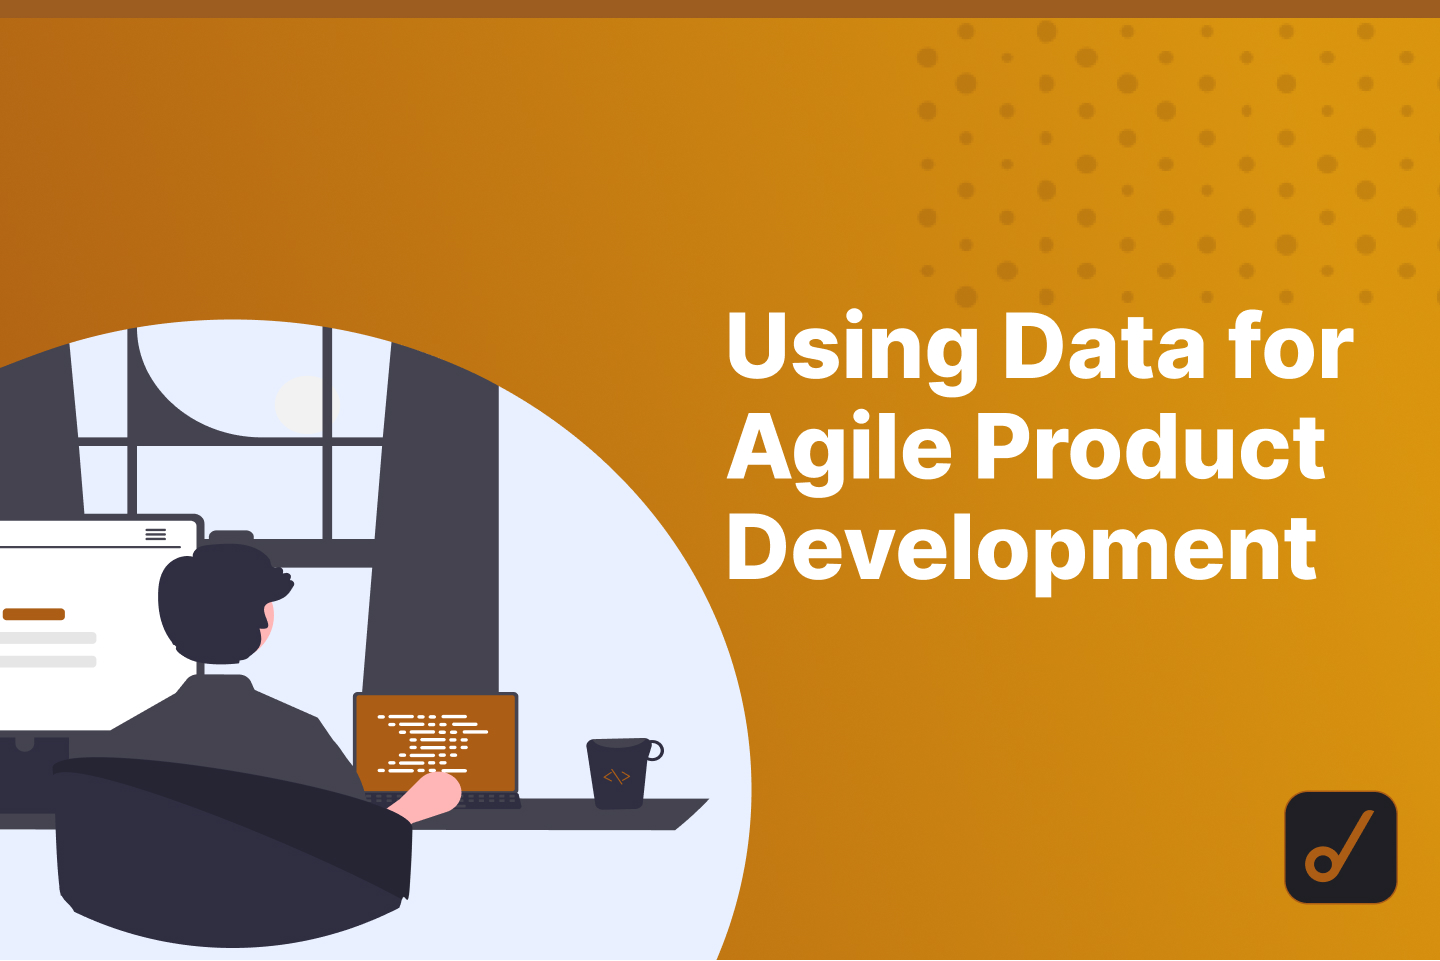 How to Leverage Data for Agile Product Development